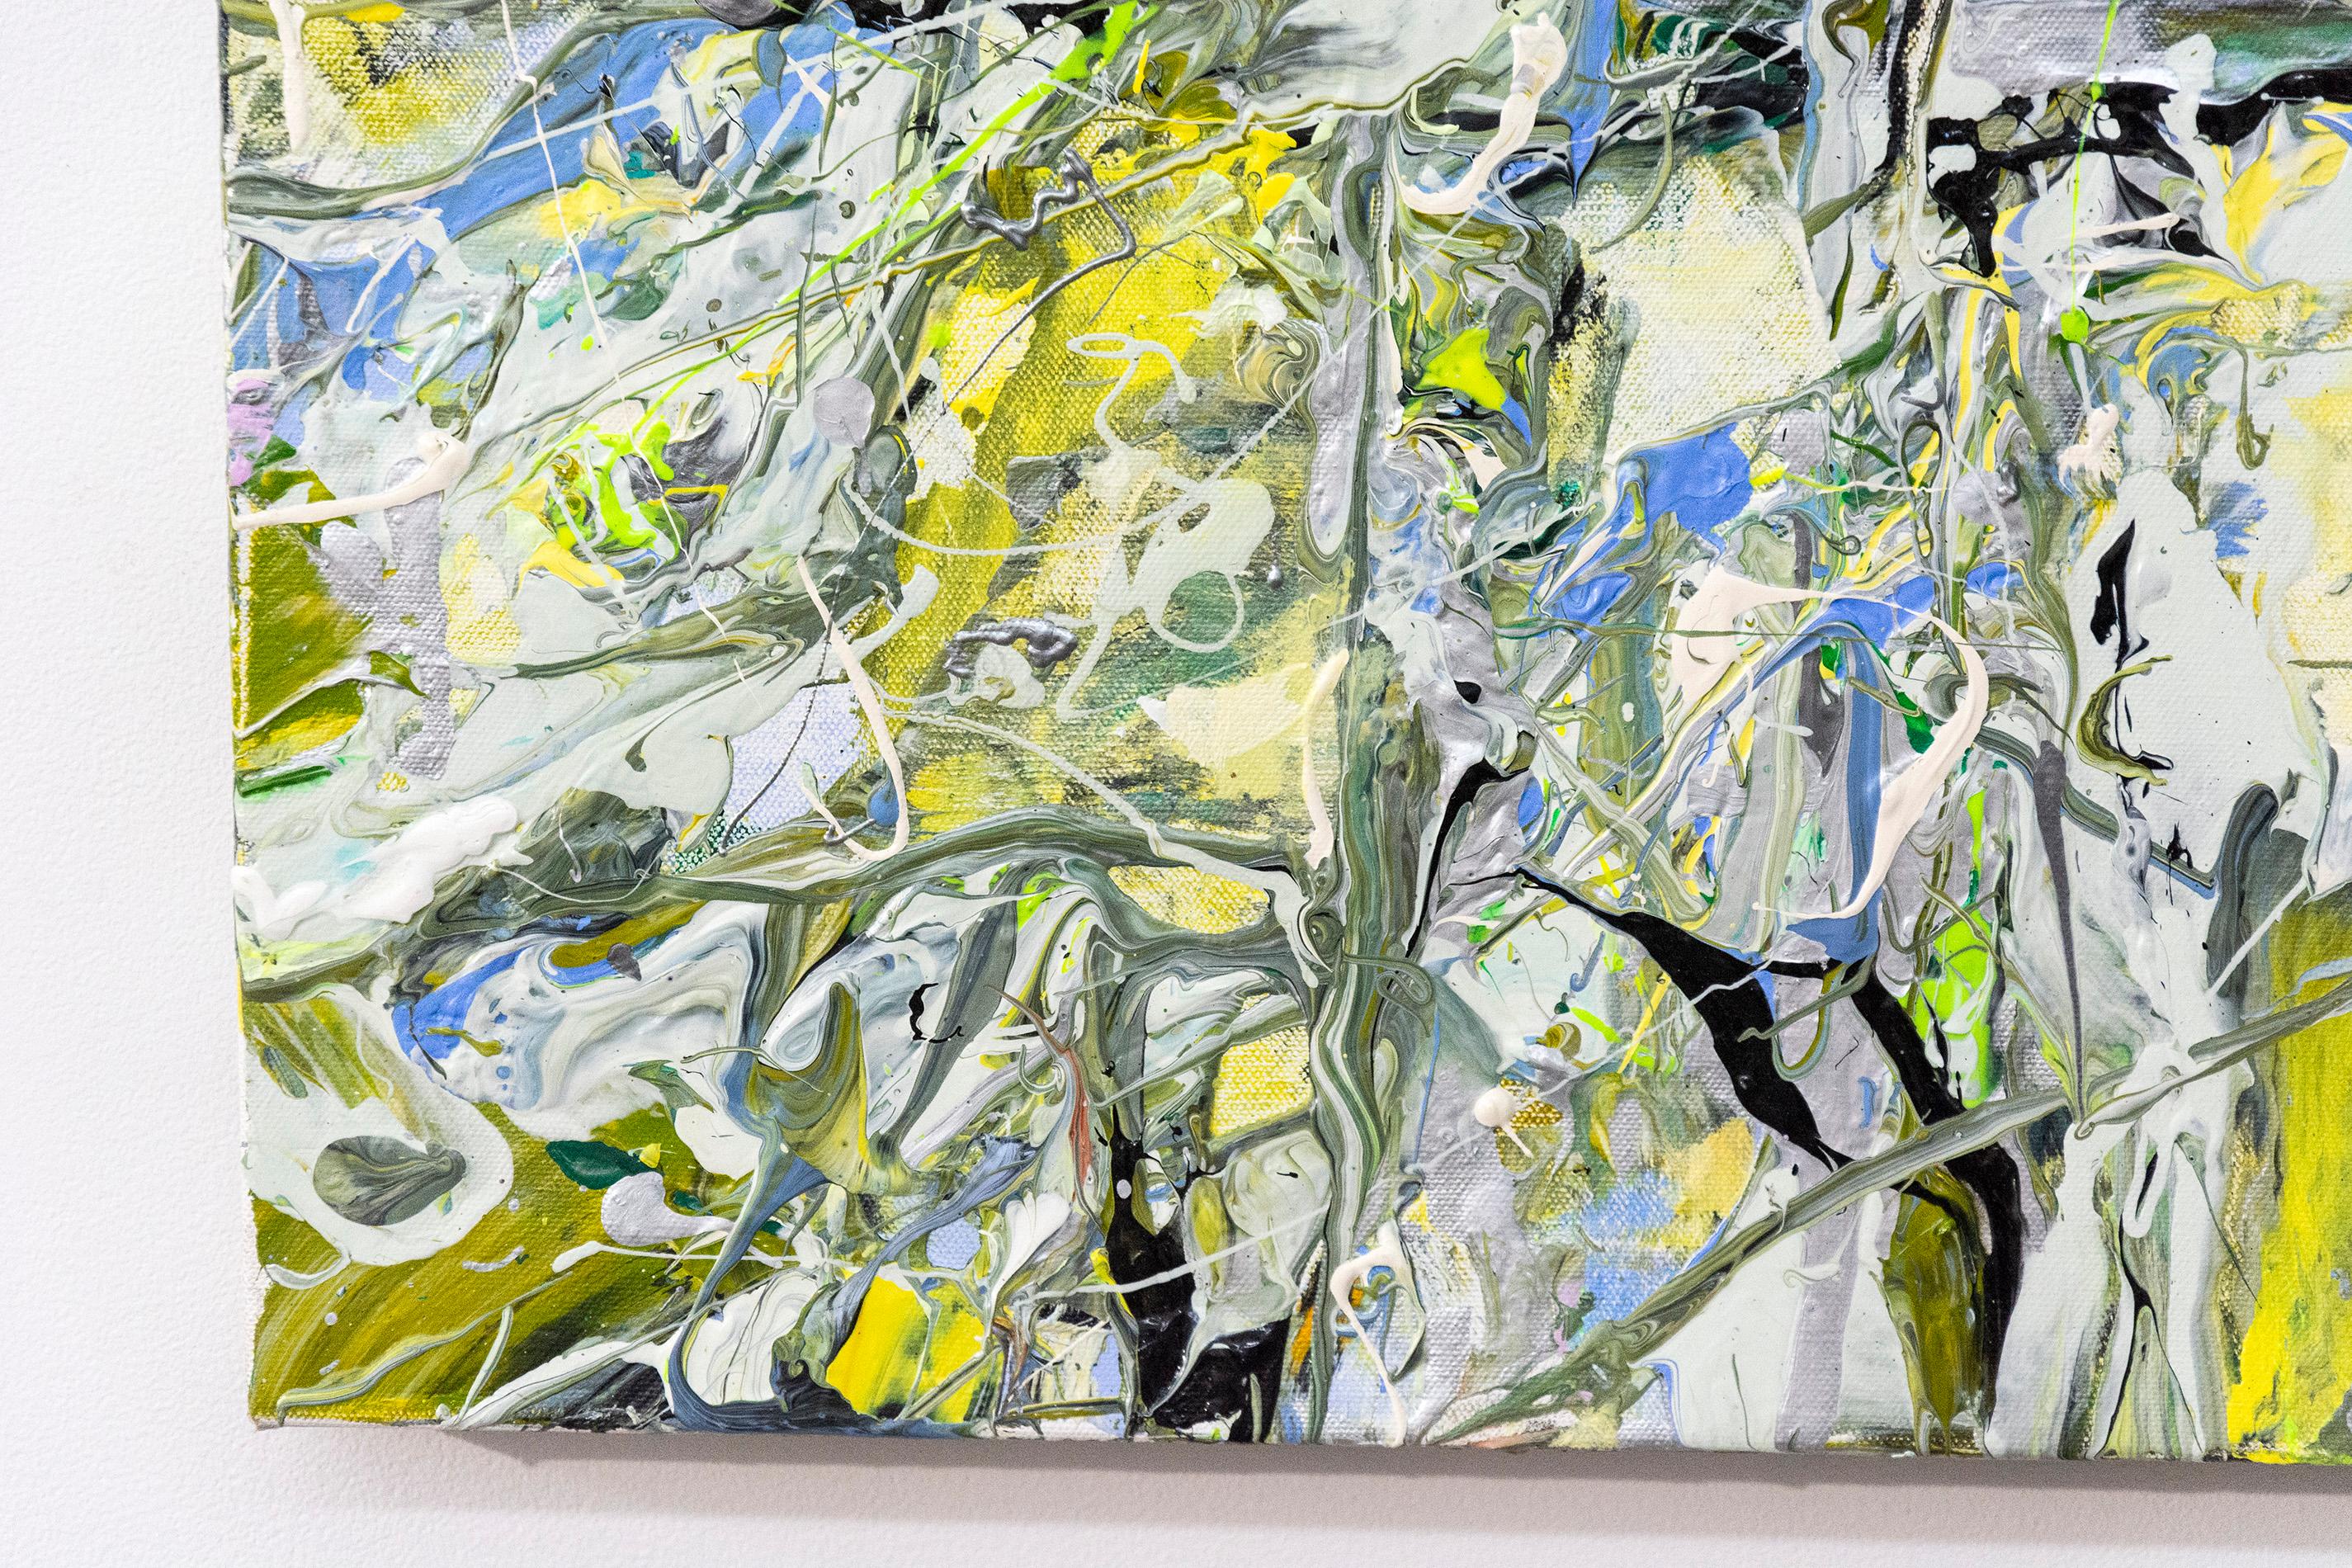 Swirling passages and drips of yellow, periwinkle, moss green and white coalesce at a central point in this action painting by Adam Cohen. Cohen intersects the language of heroic Abstract Expressionism with narrative to re-invent the experience of